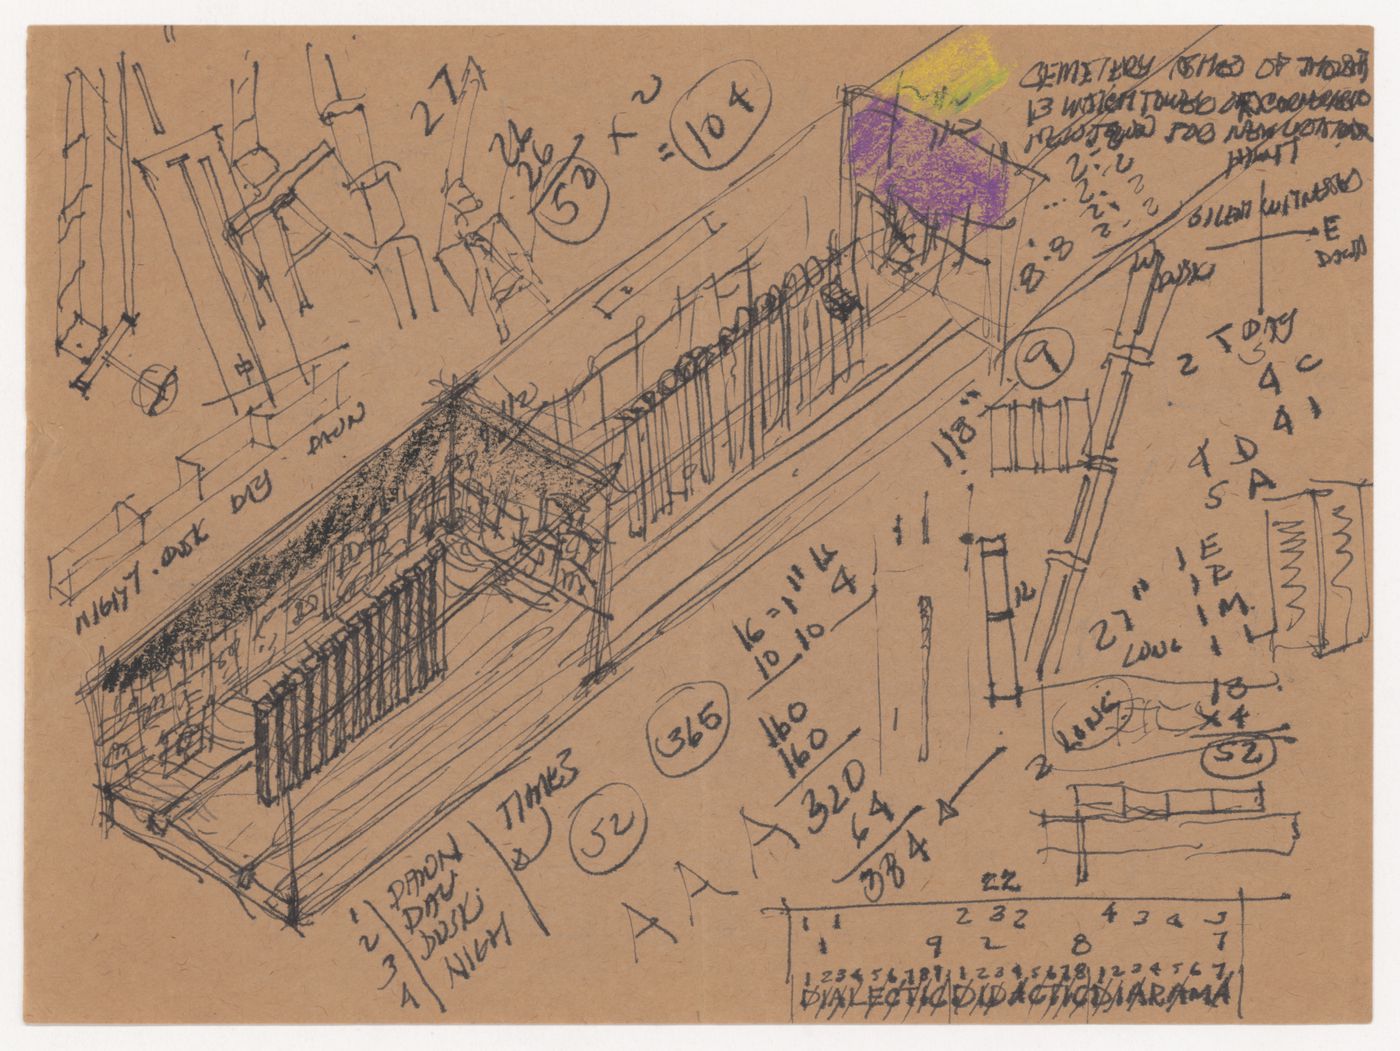 Sketches and notes for The Thirteen Watchtowers of Cannaregio